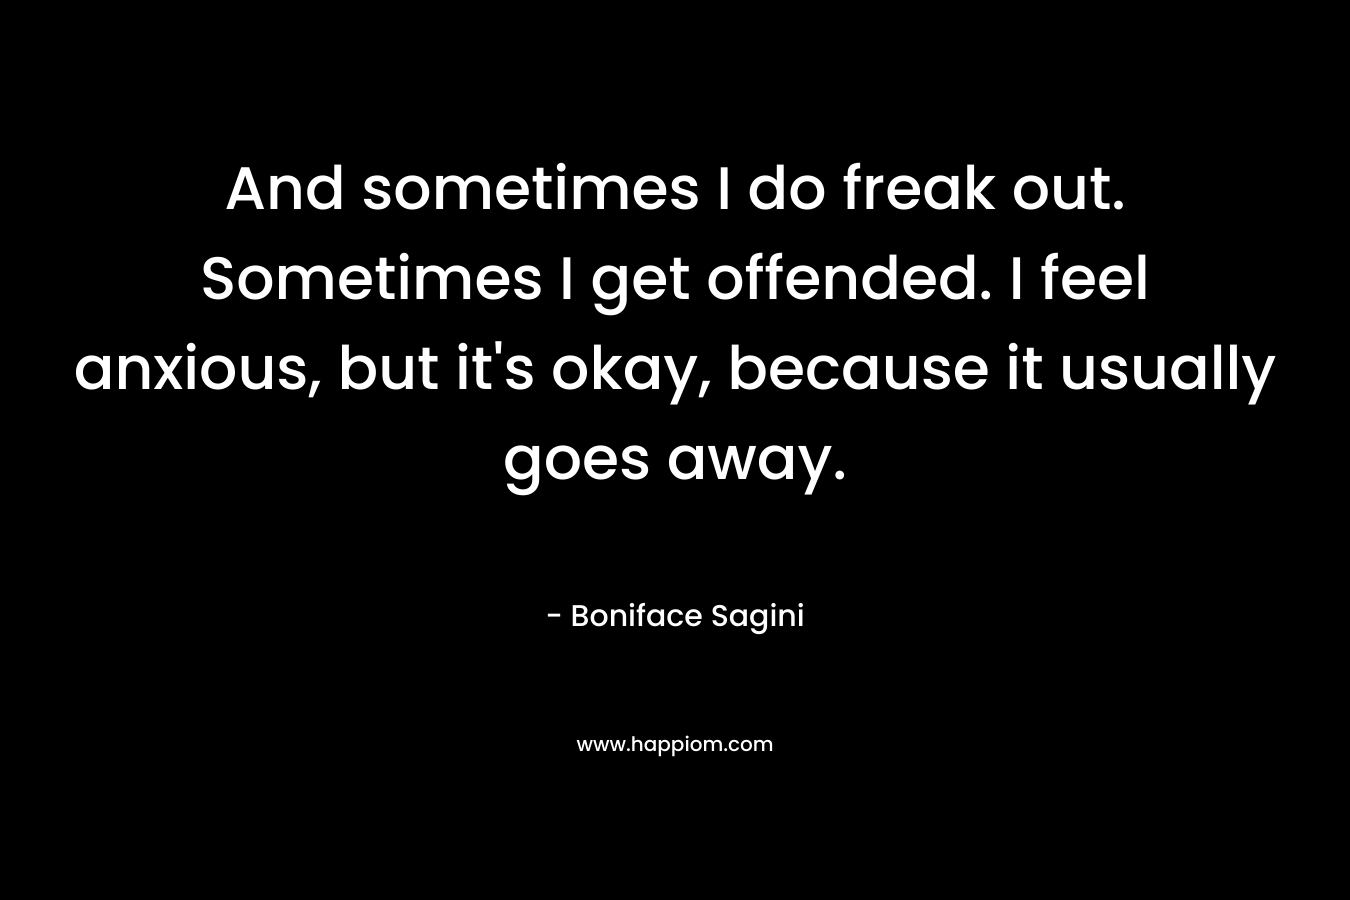 And sometimes I do freak out. Sometimes I get offended. I feel anxious, but it’s okay, because it usually goes away. – Boniface Sagini